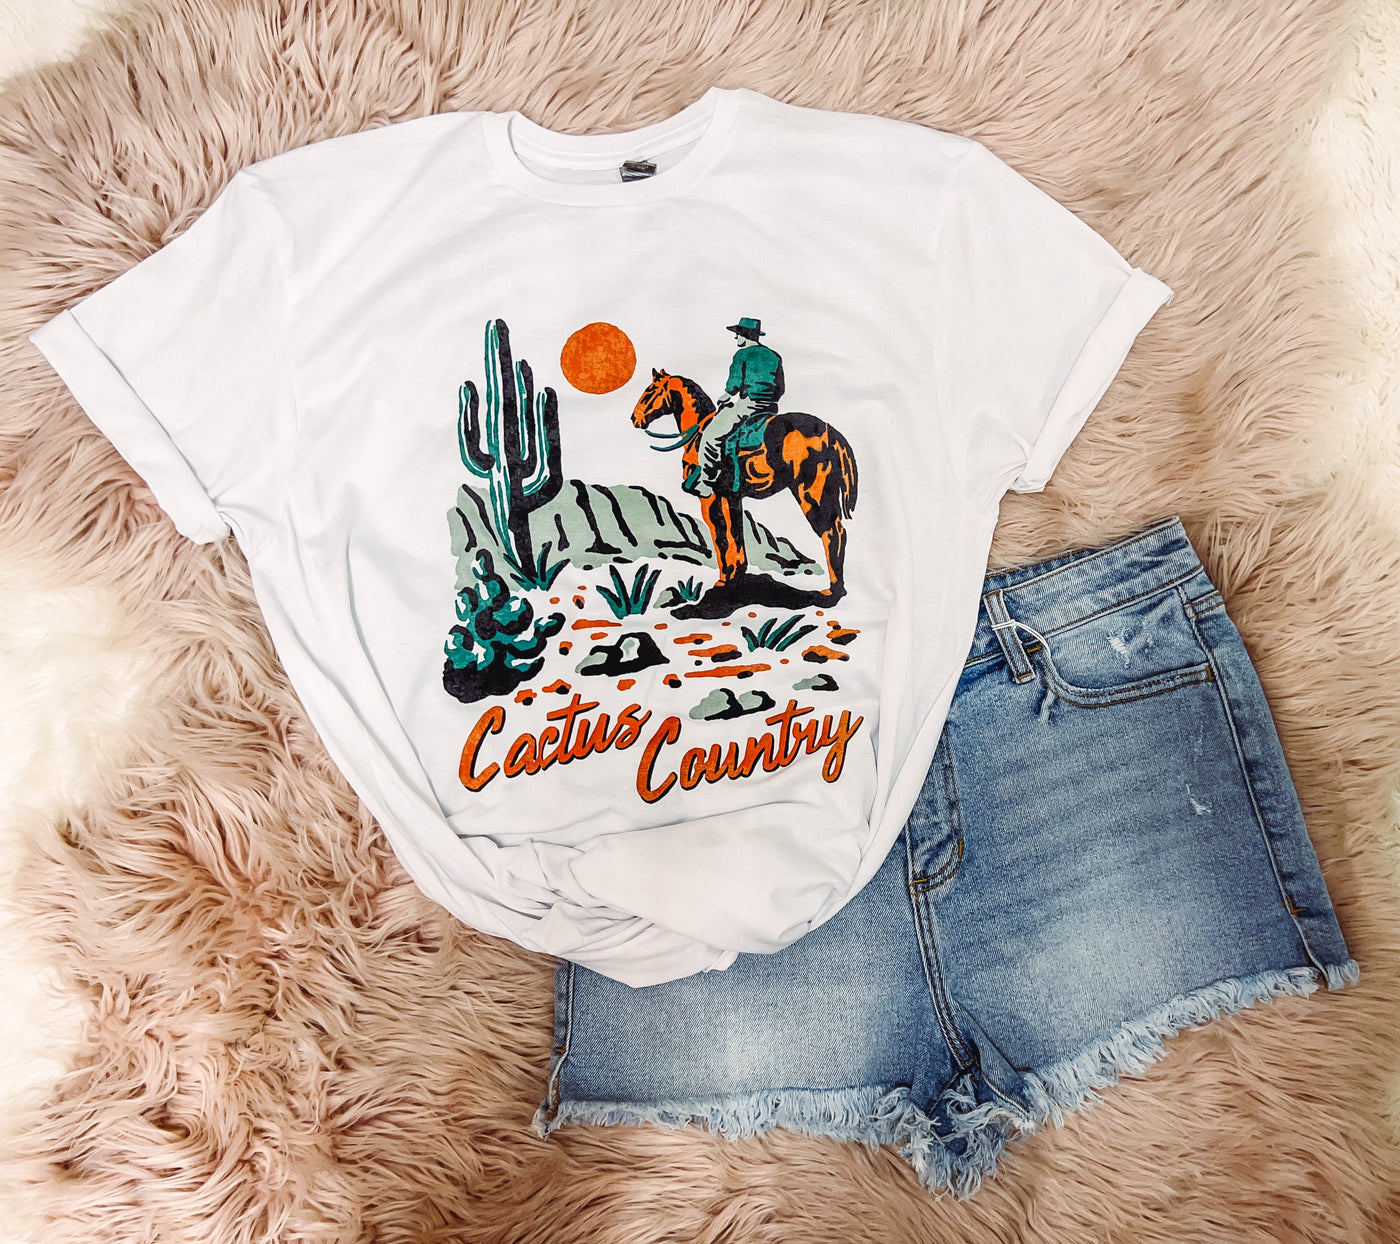 Cactus Country - Graphic Tee